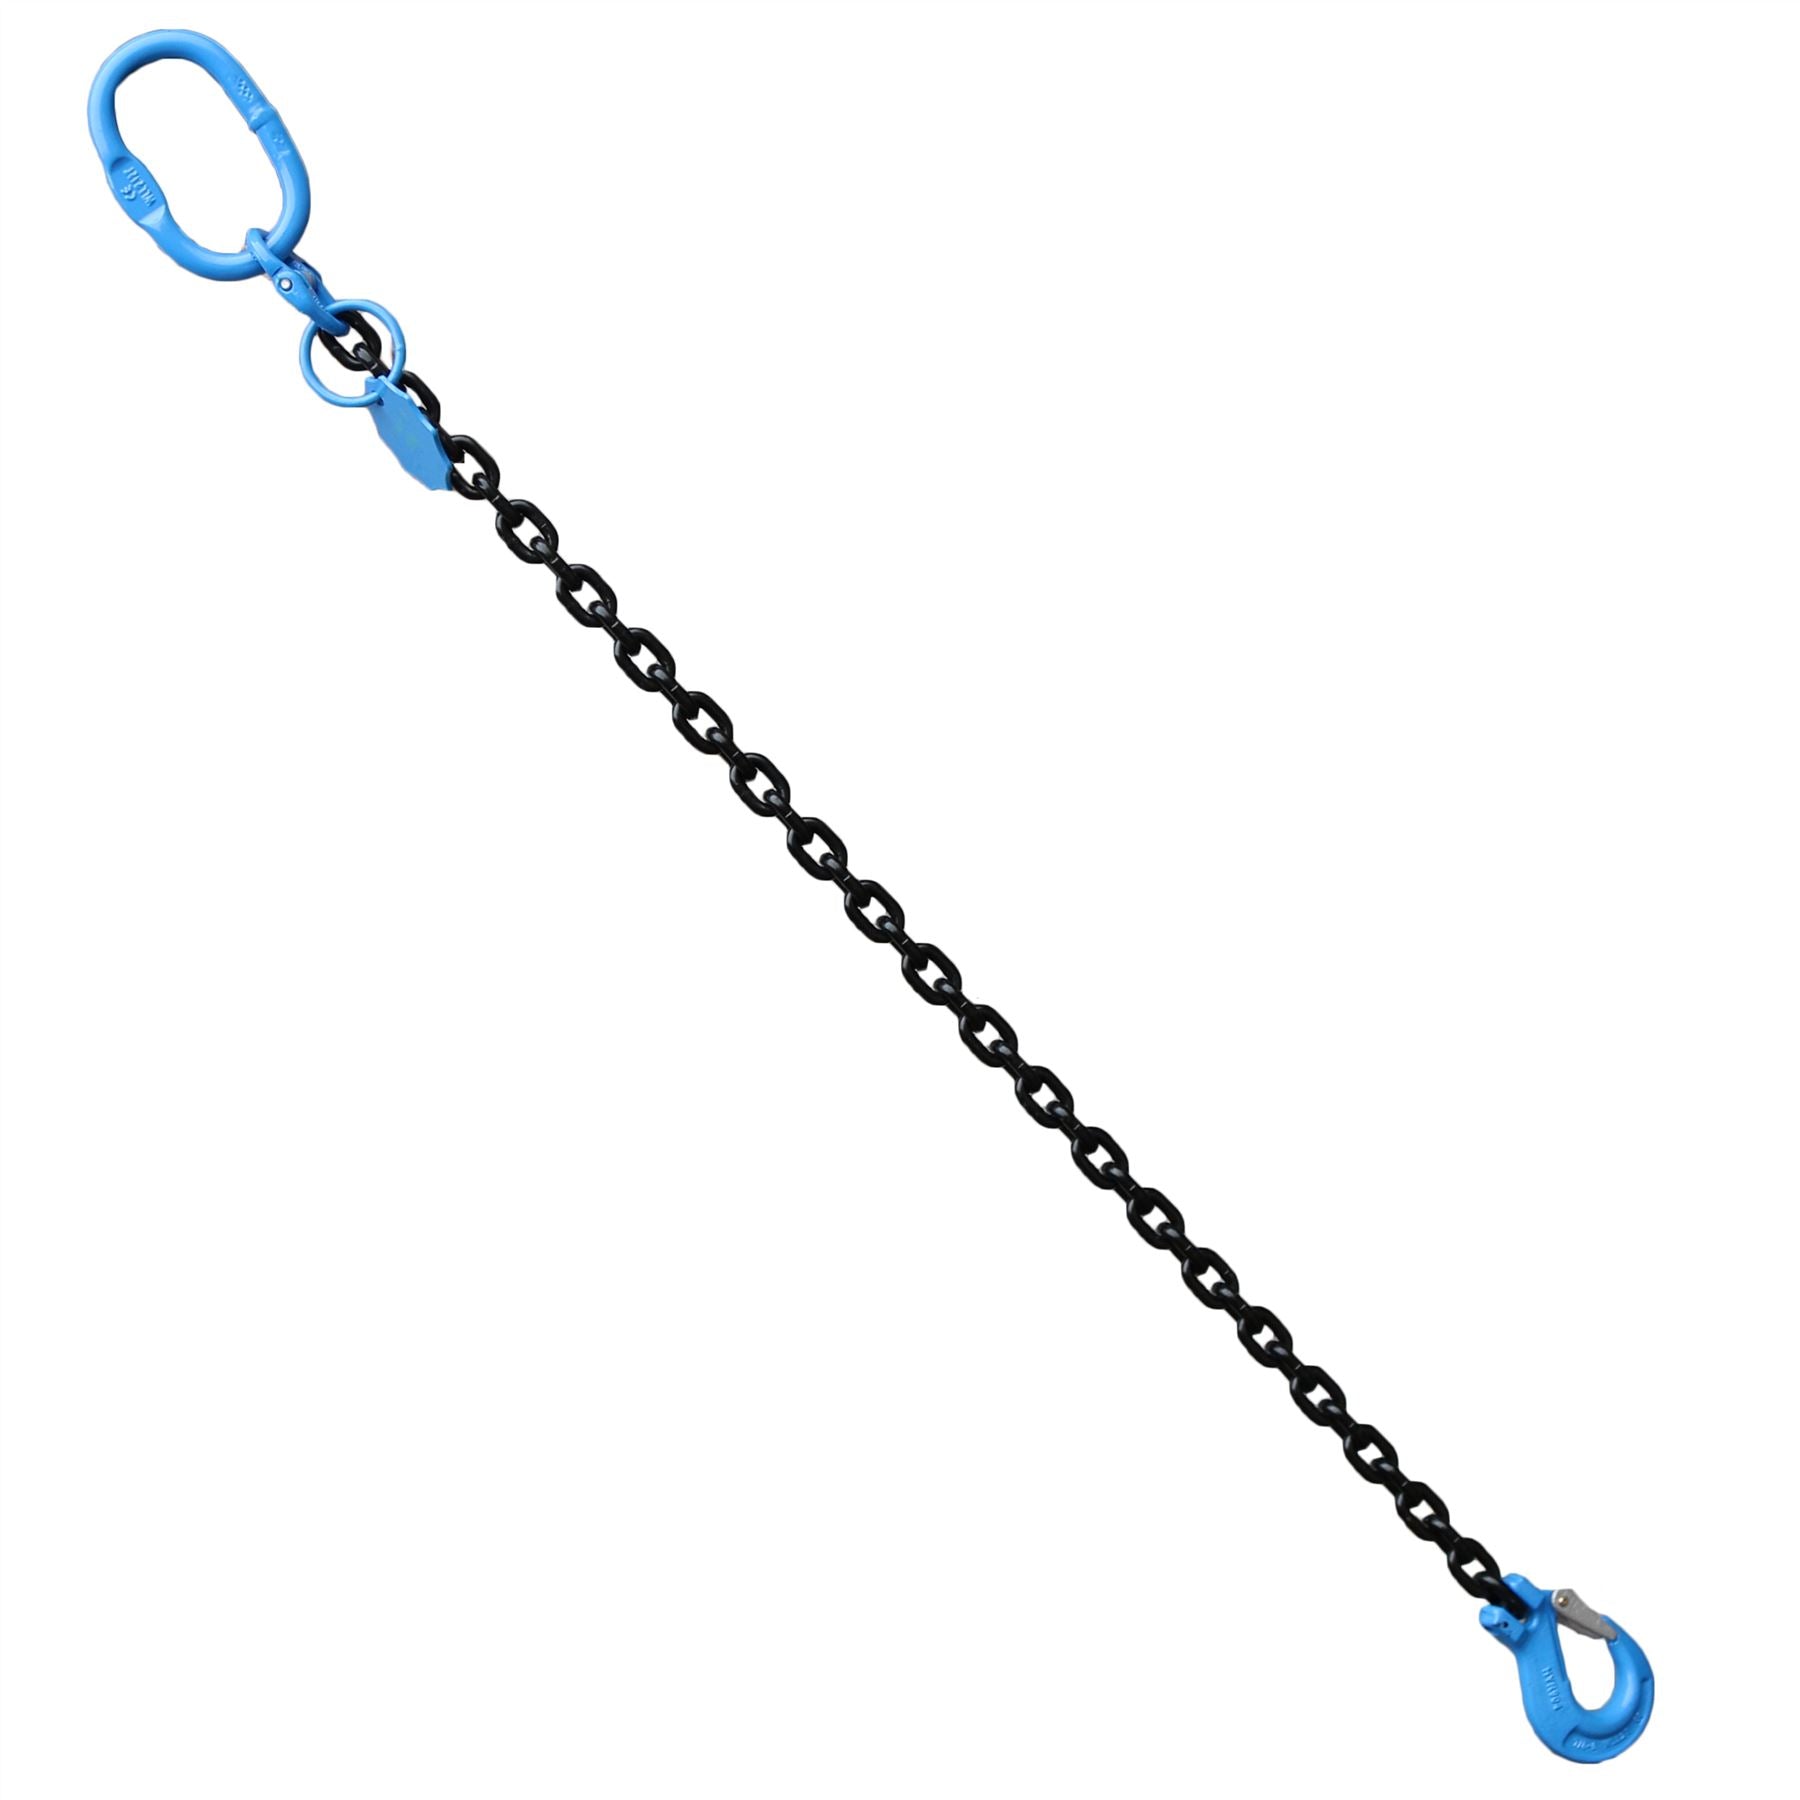 1 Leg Lifting Chain Sling with Clevis Grab Hook 1 Metre 8mm Chain 2 Ton WLL